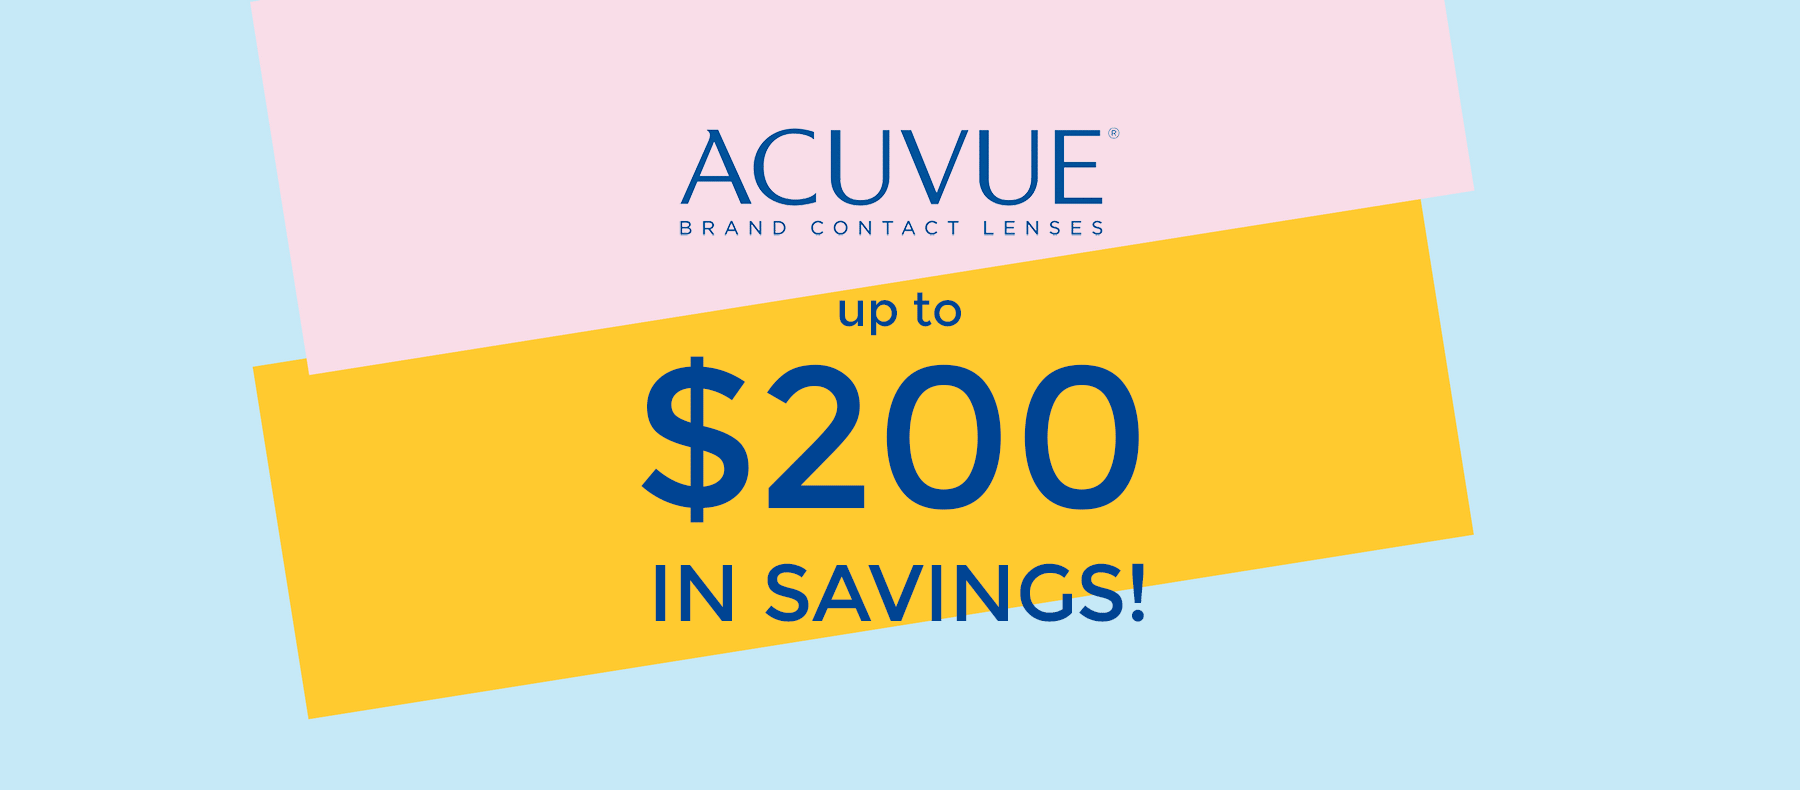 myacuvue-rewards-save-up-to-200-on-acuvue-contact-lenses-mott